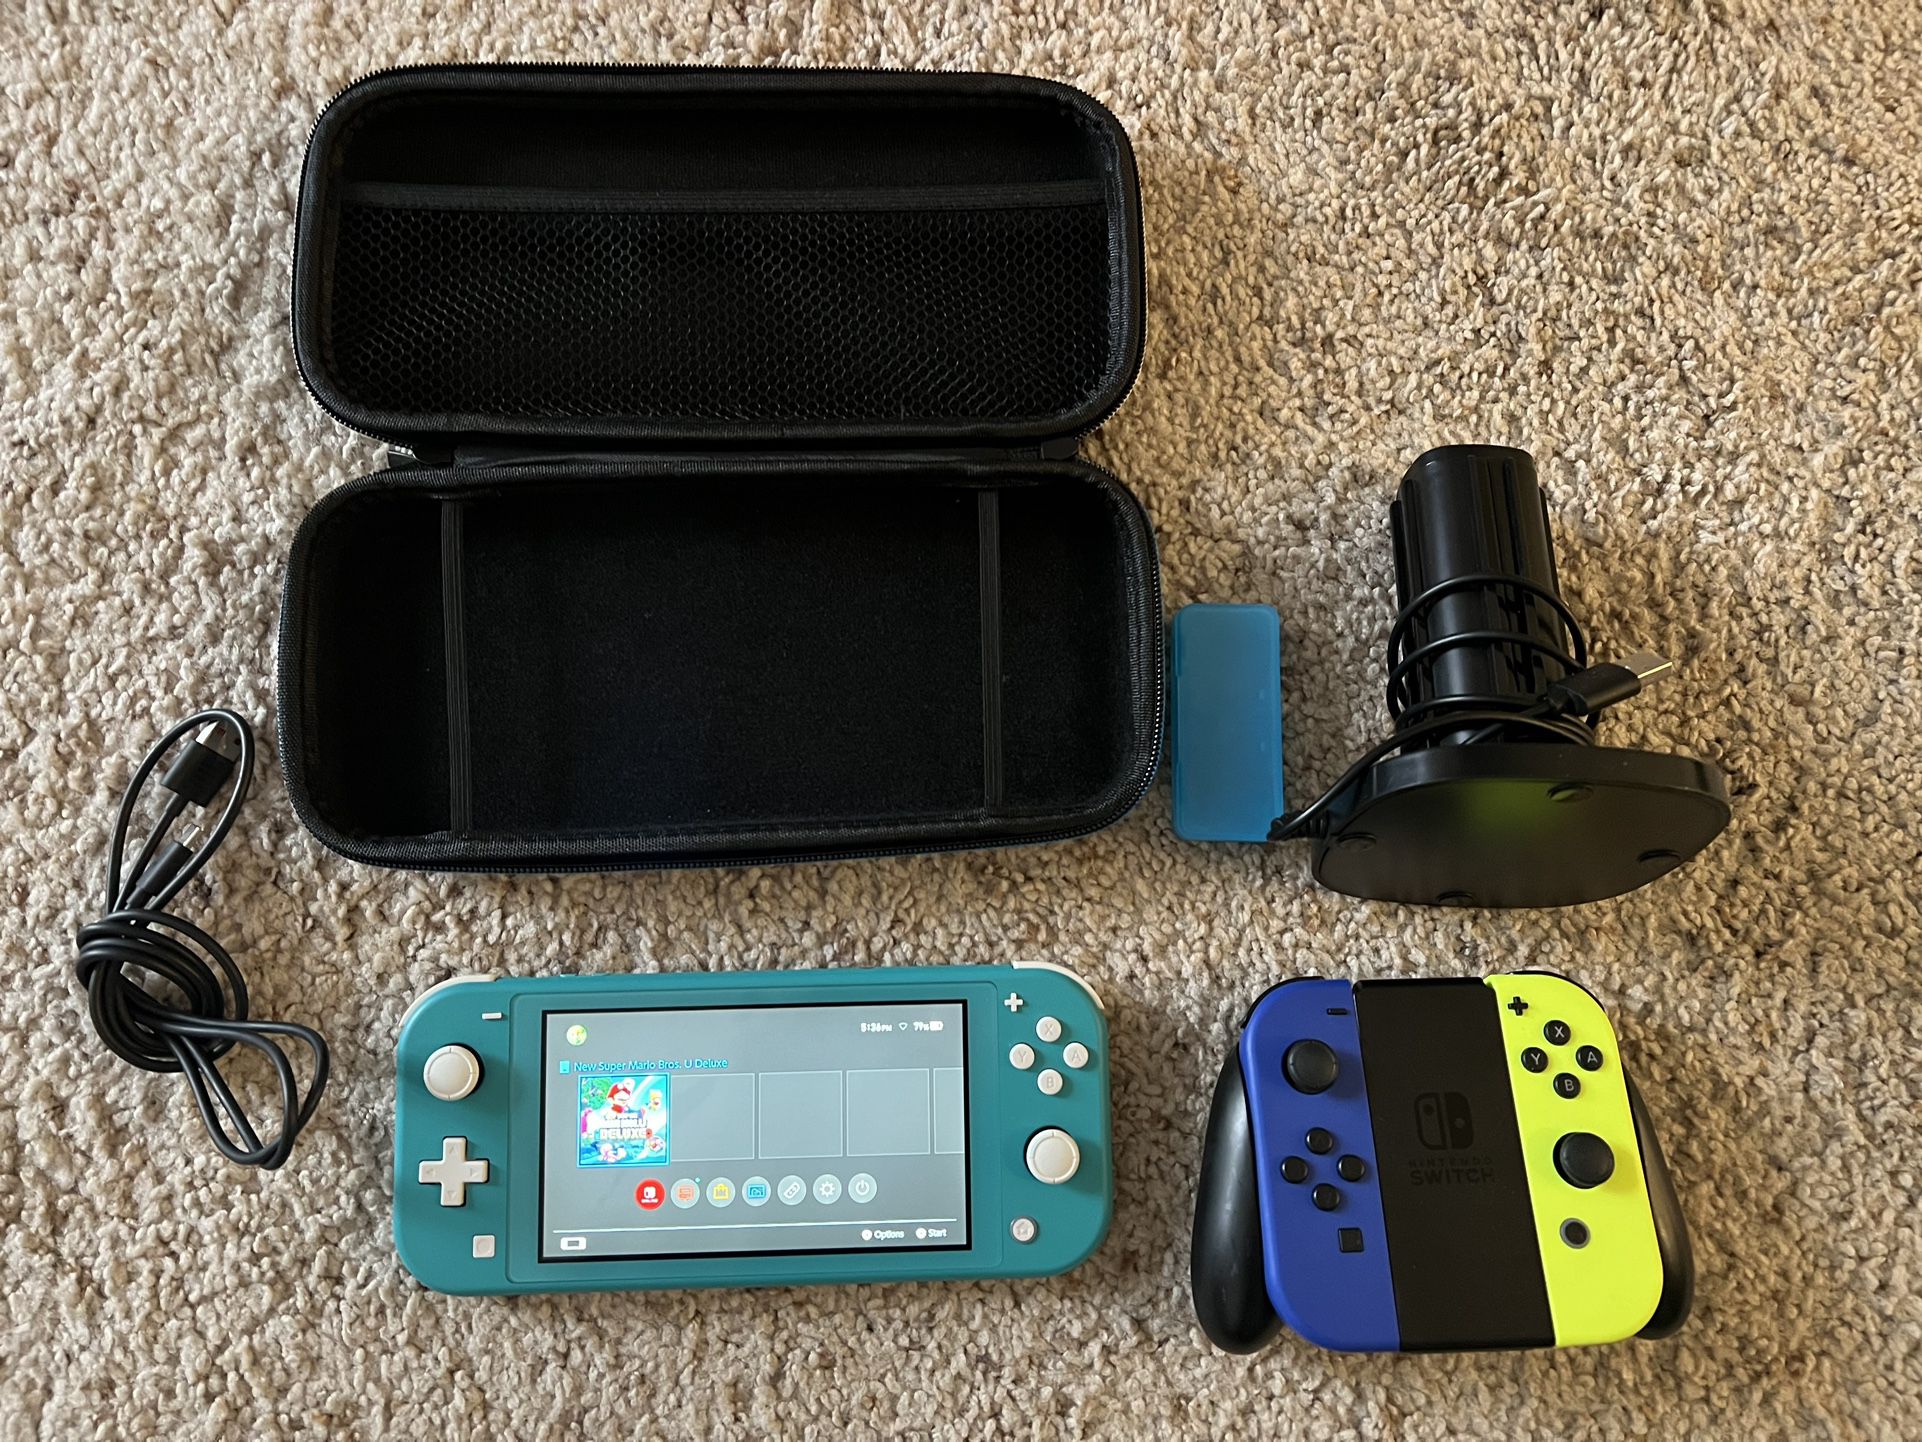 Nintendo Switch Lite with Mario Bros game and extra controller